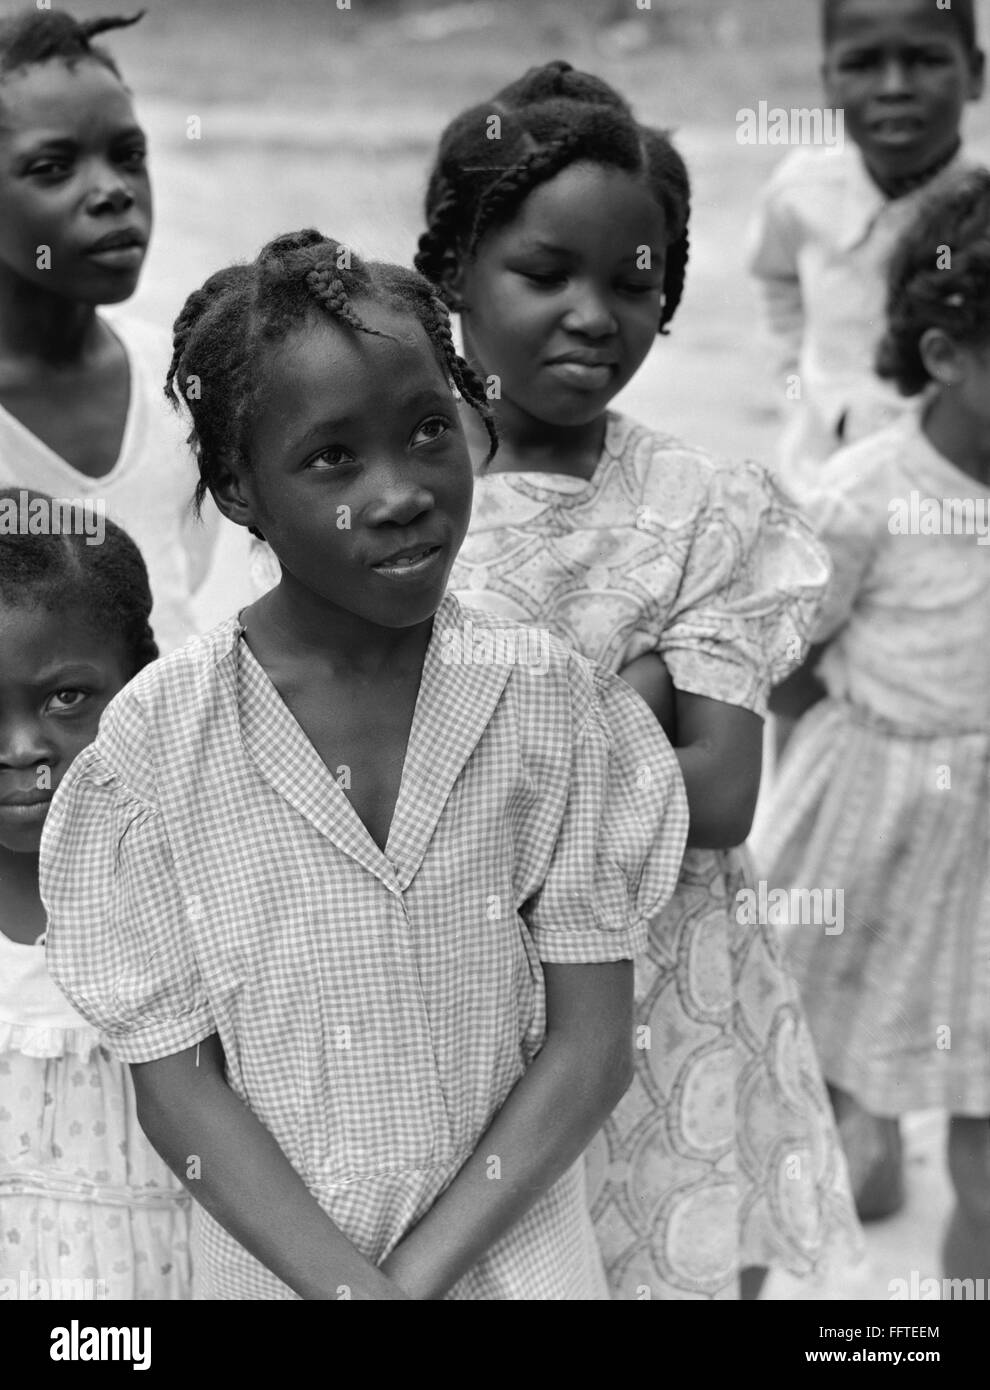 ST. CROIX: CHILDREN, 1941. /nChildren at the Peter's Rest elementary school, Christiansted, St. Croix, Virgin Islands. Photograph by Jack Delano, December 1941. Stock Photo